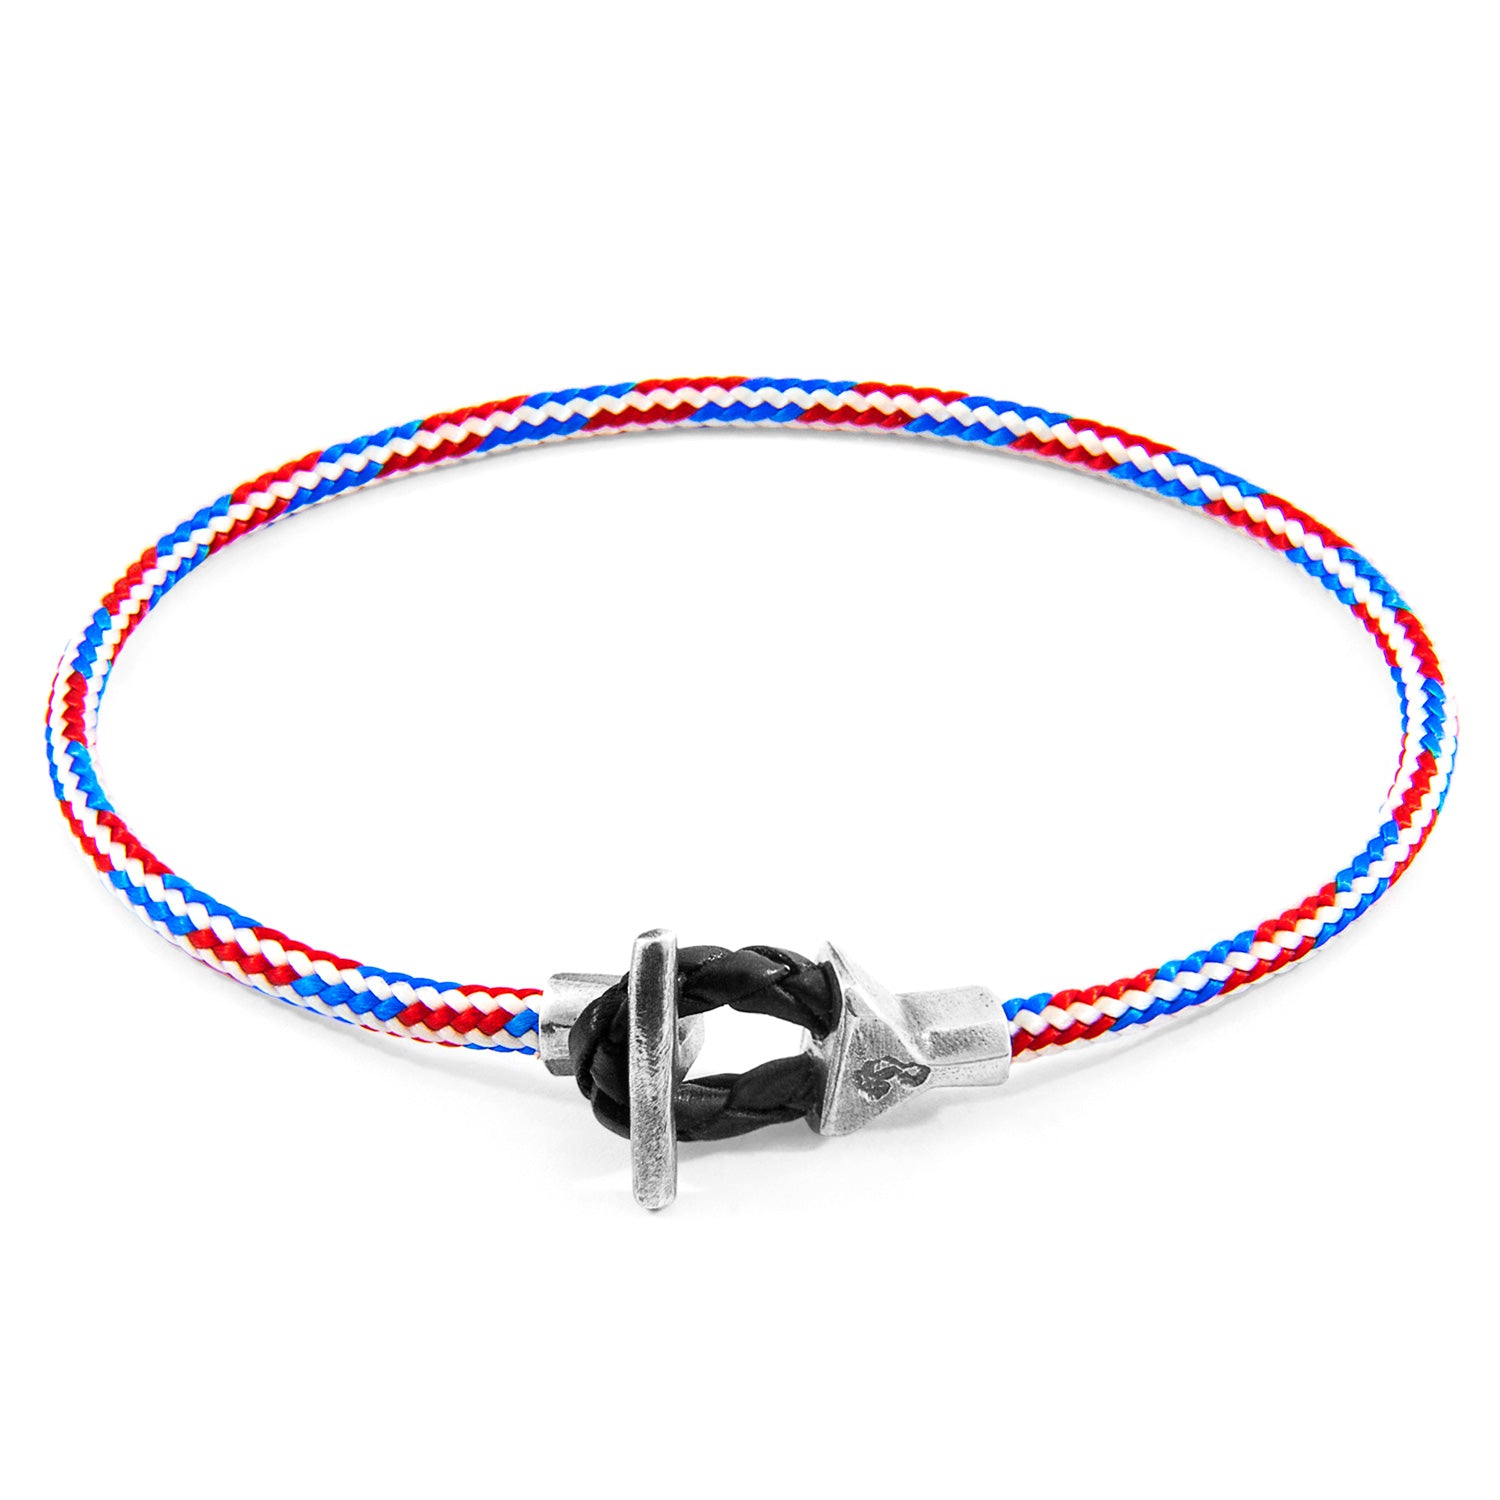 Handcrafted Red, White, and Blue Silver Rope Bracelet by Project-RWB 
This British-made bracelet by Project-RWB features a minimalist design with a 3mm polyester and nylon rope, braided leather, and a sterling silver t-bar clamp. Available in - Bracelets - Bijou Her -  -  - 